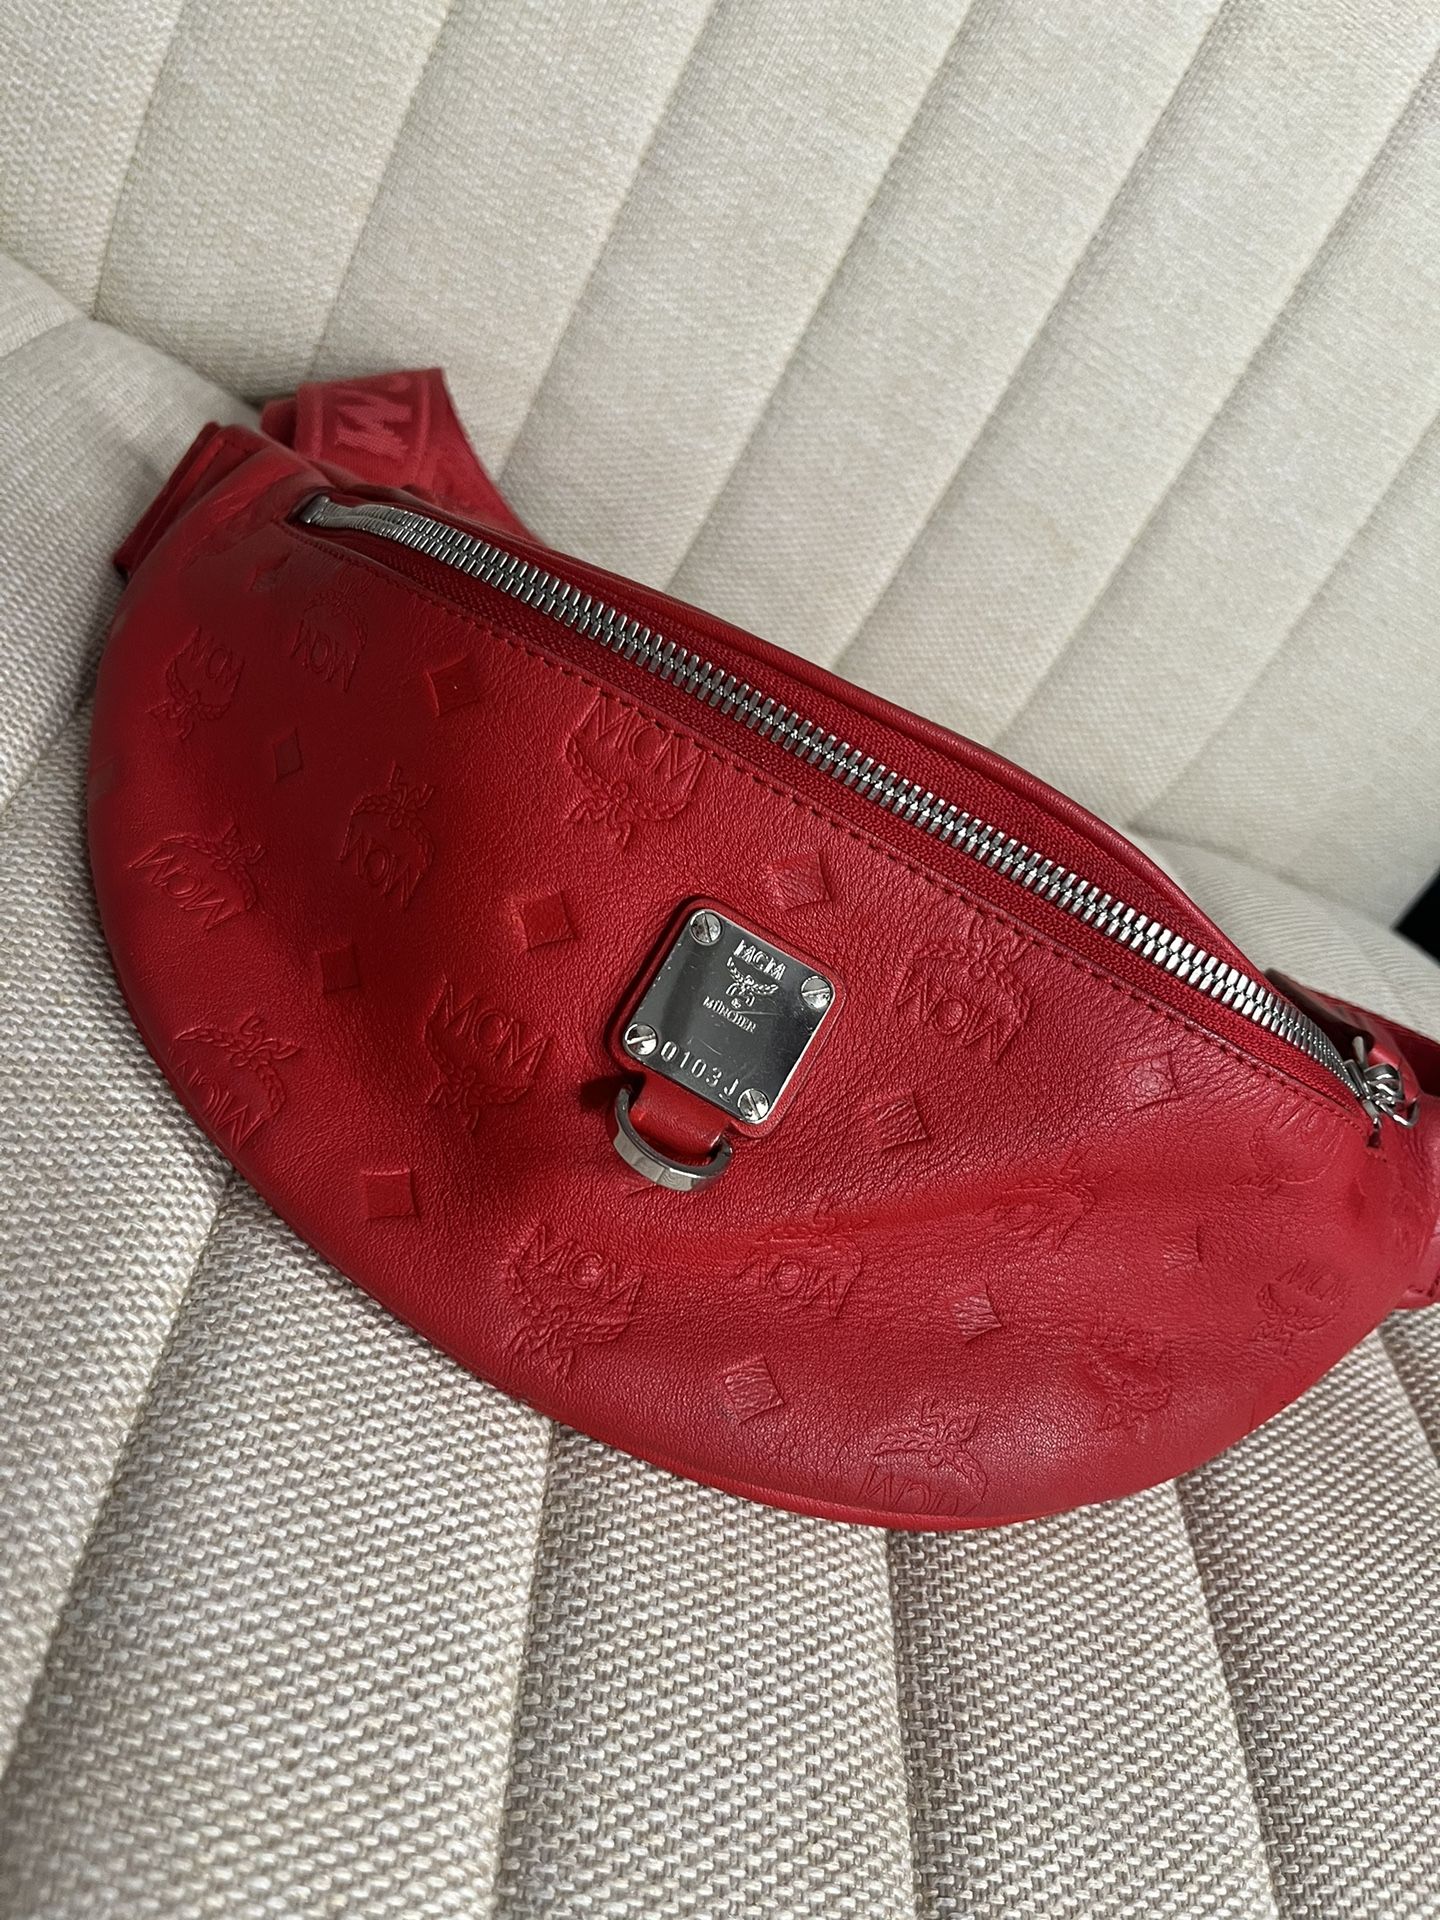 Red mcm fannypack